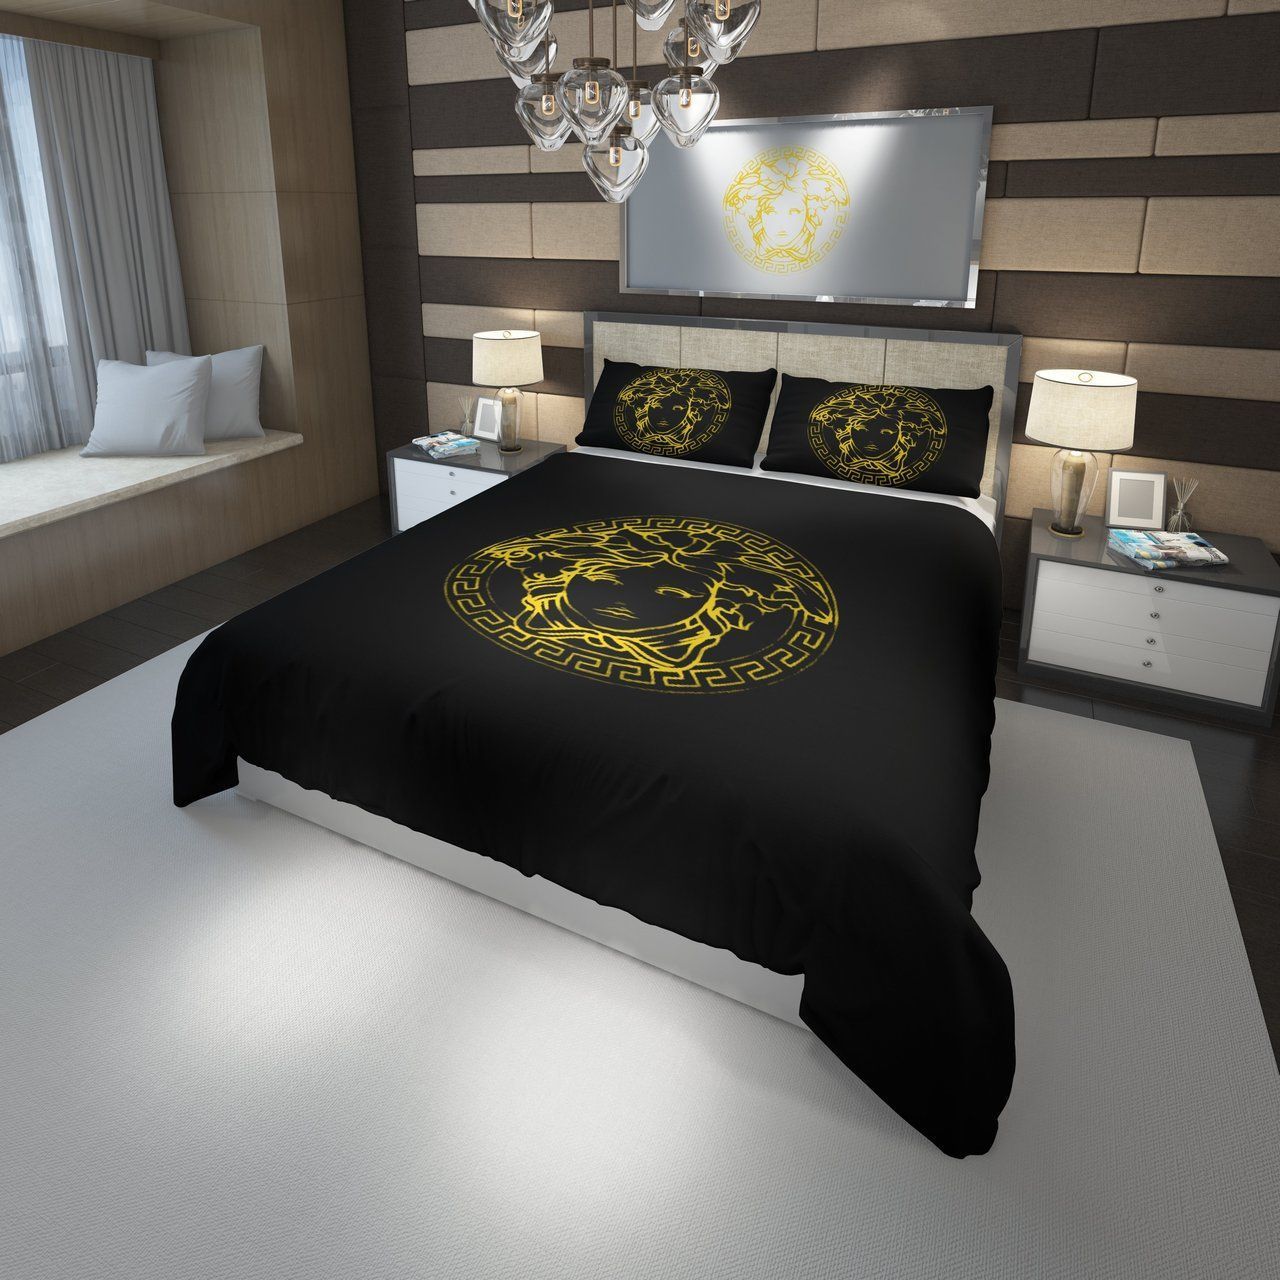 Let me show you about some luxury brand bedding set 2022 112